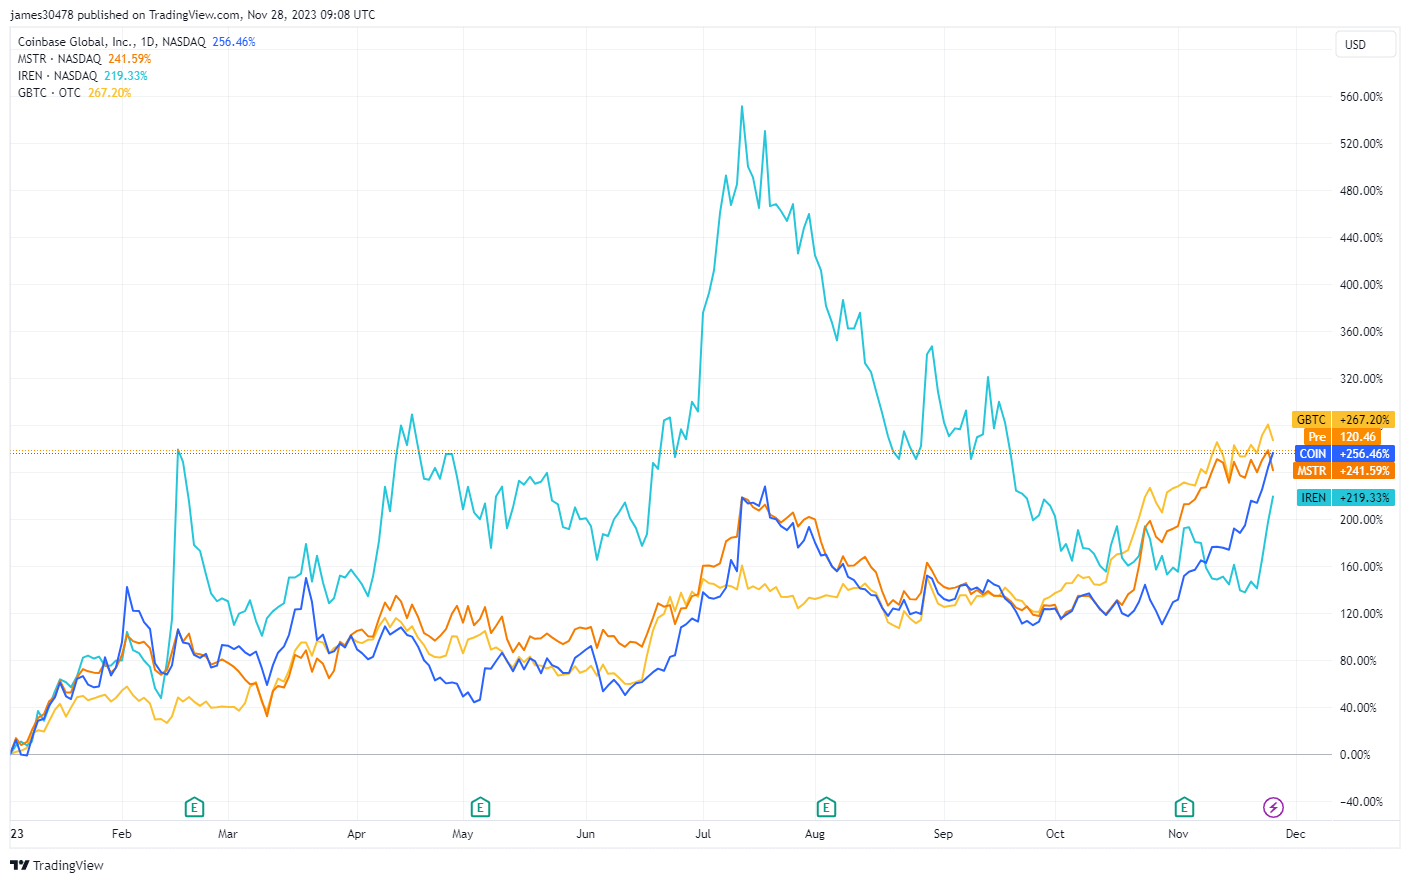 YTD Performance: COIN,MSTR, IREN and GBTC: (Source: Trading View)